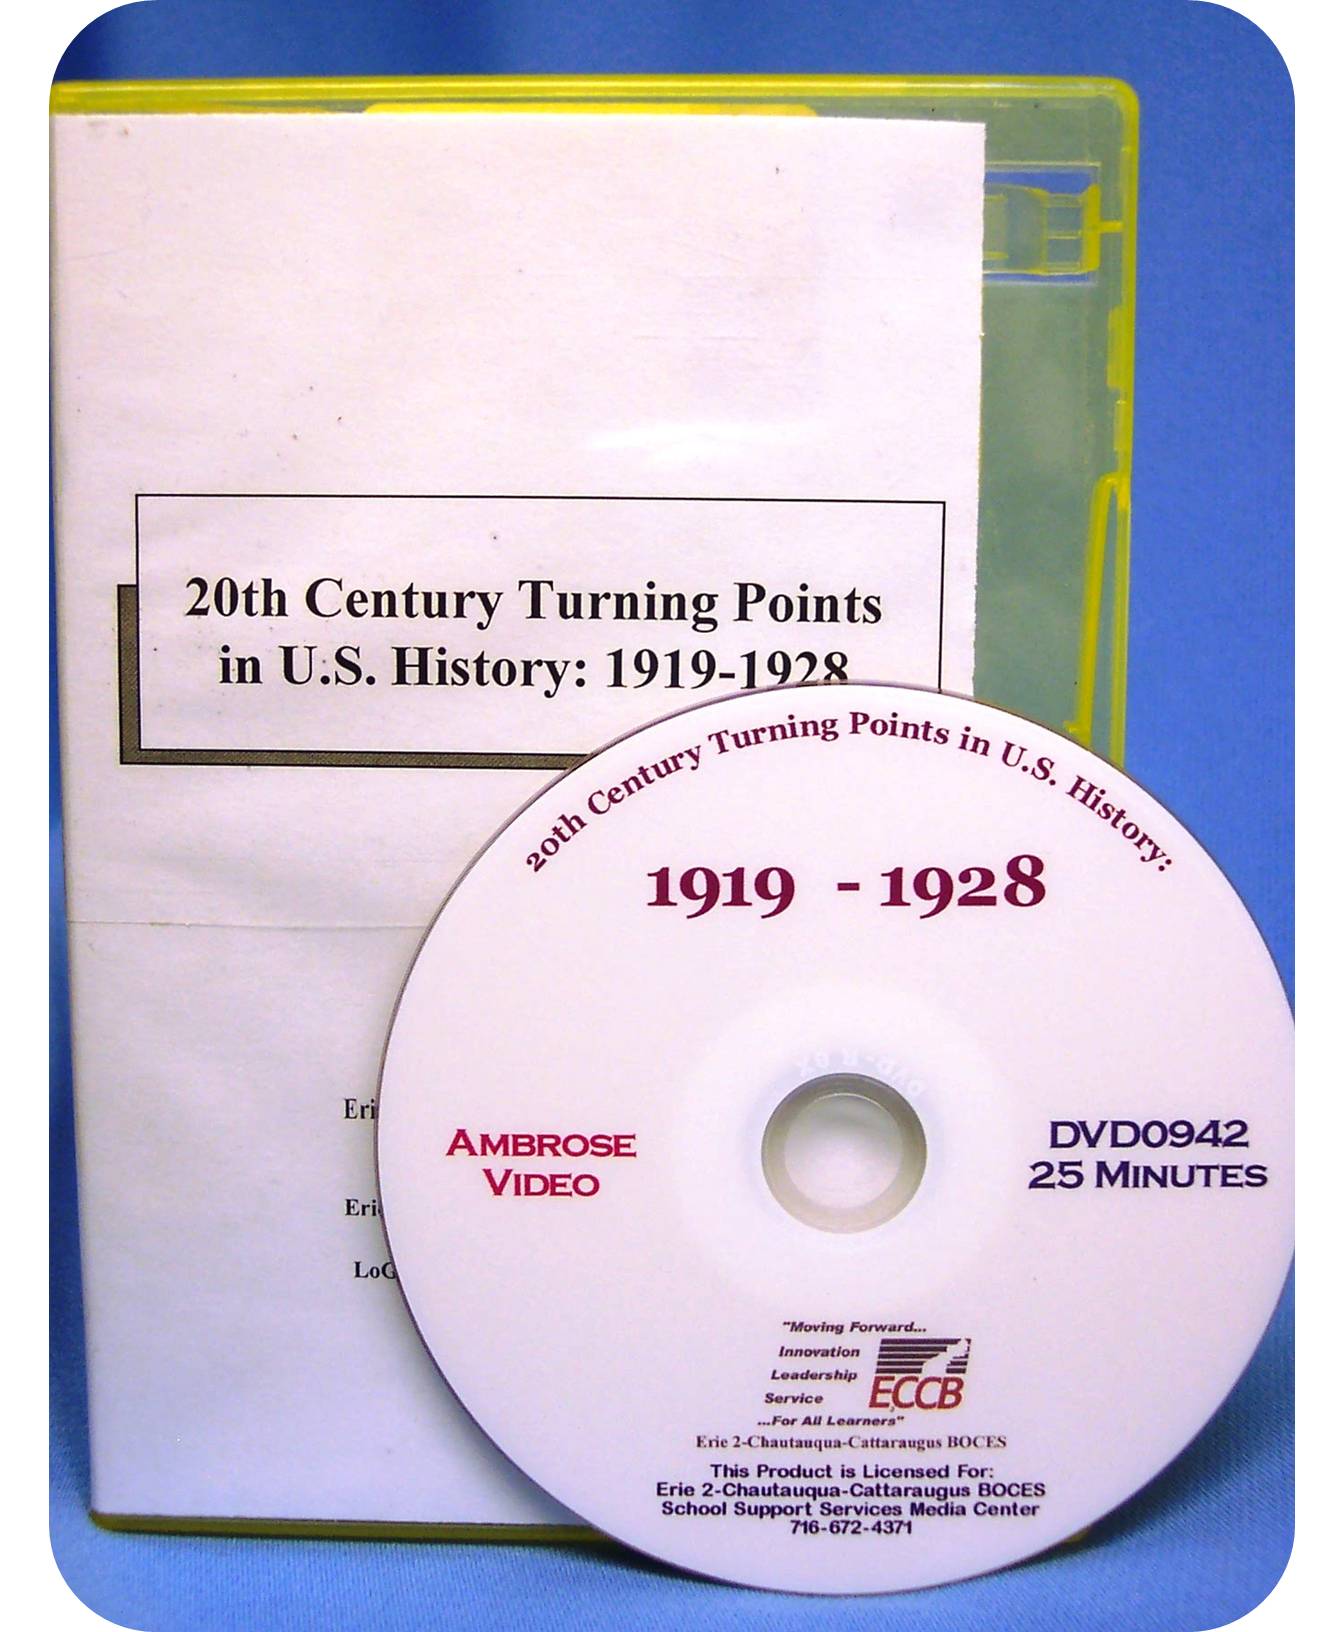 20th Century Turning Points in U.S. History: 1919-1928